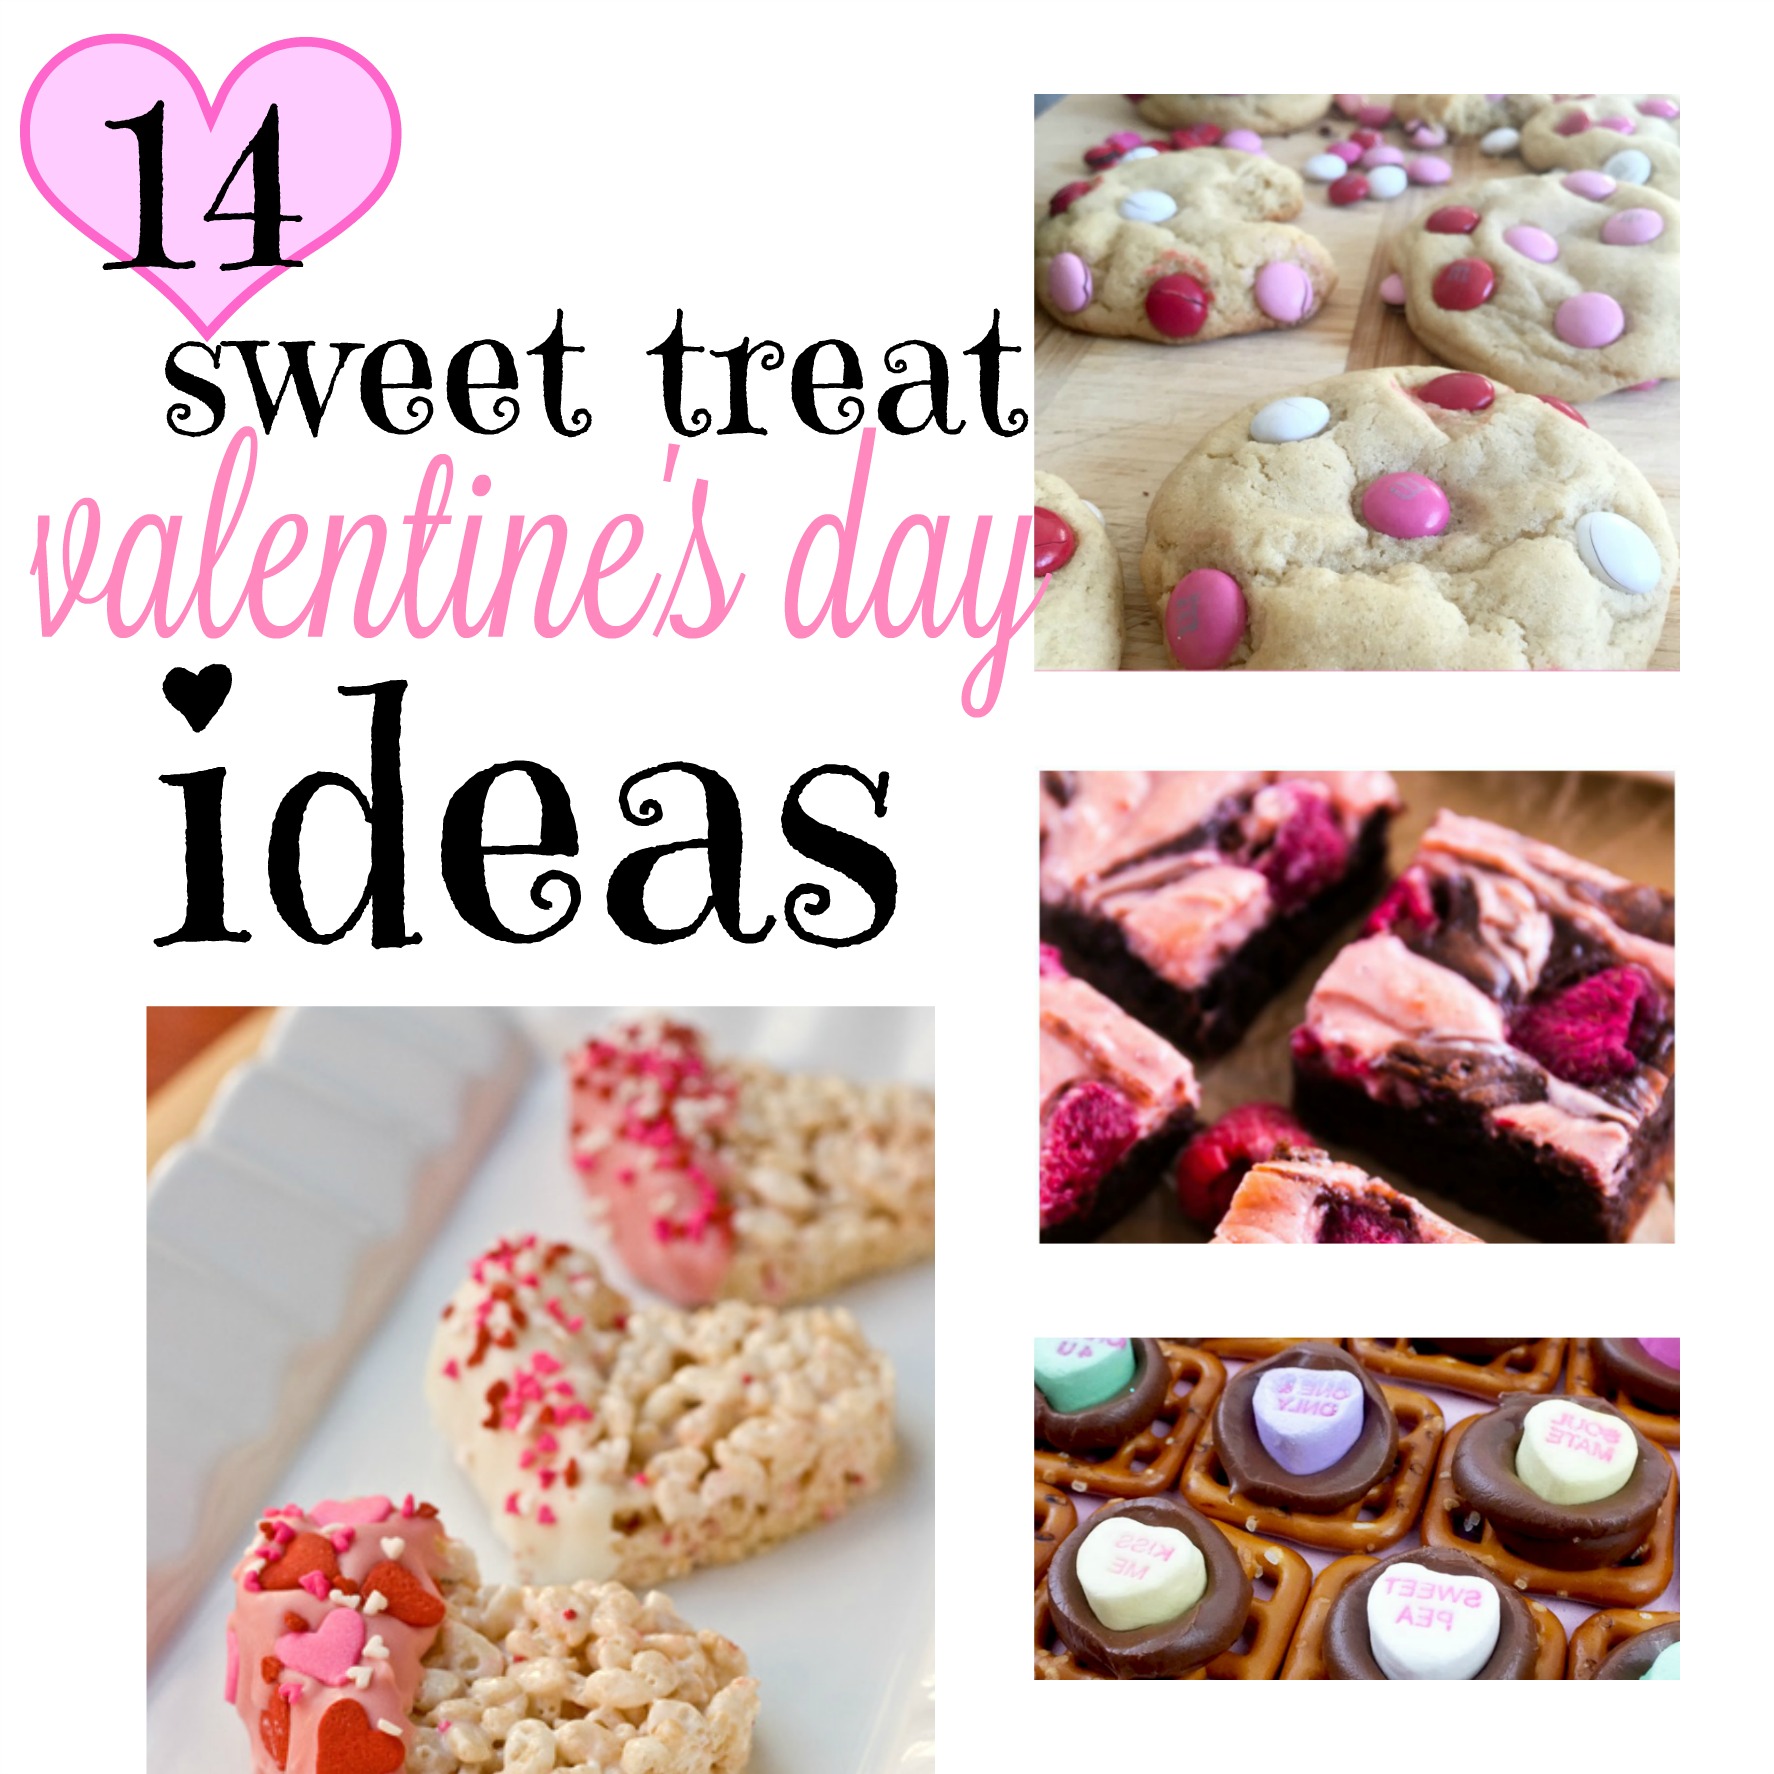 14 sweet treat ideas for Valentine's Day